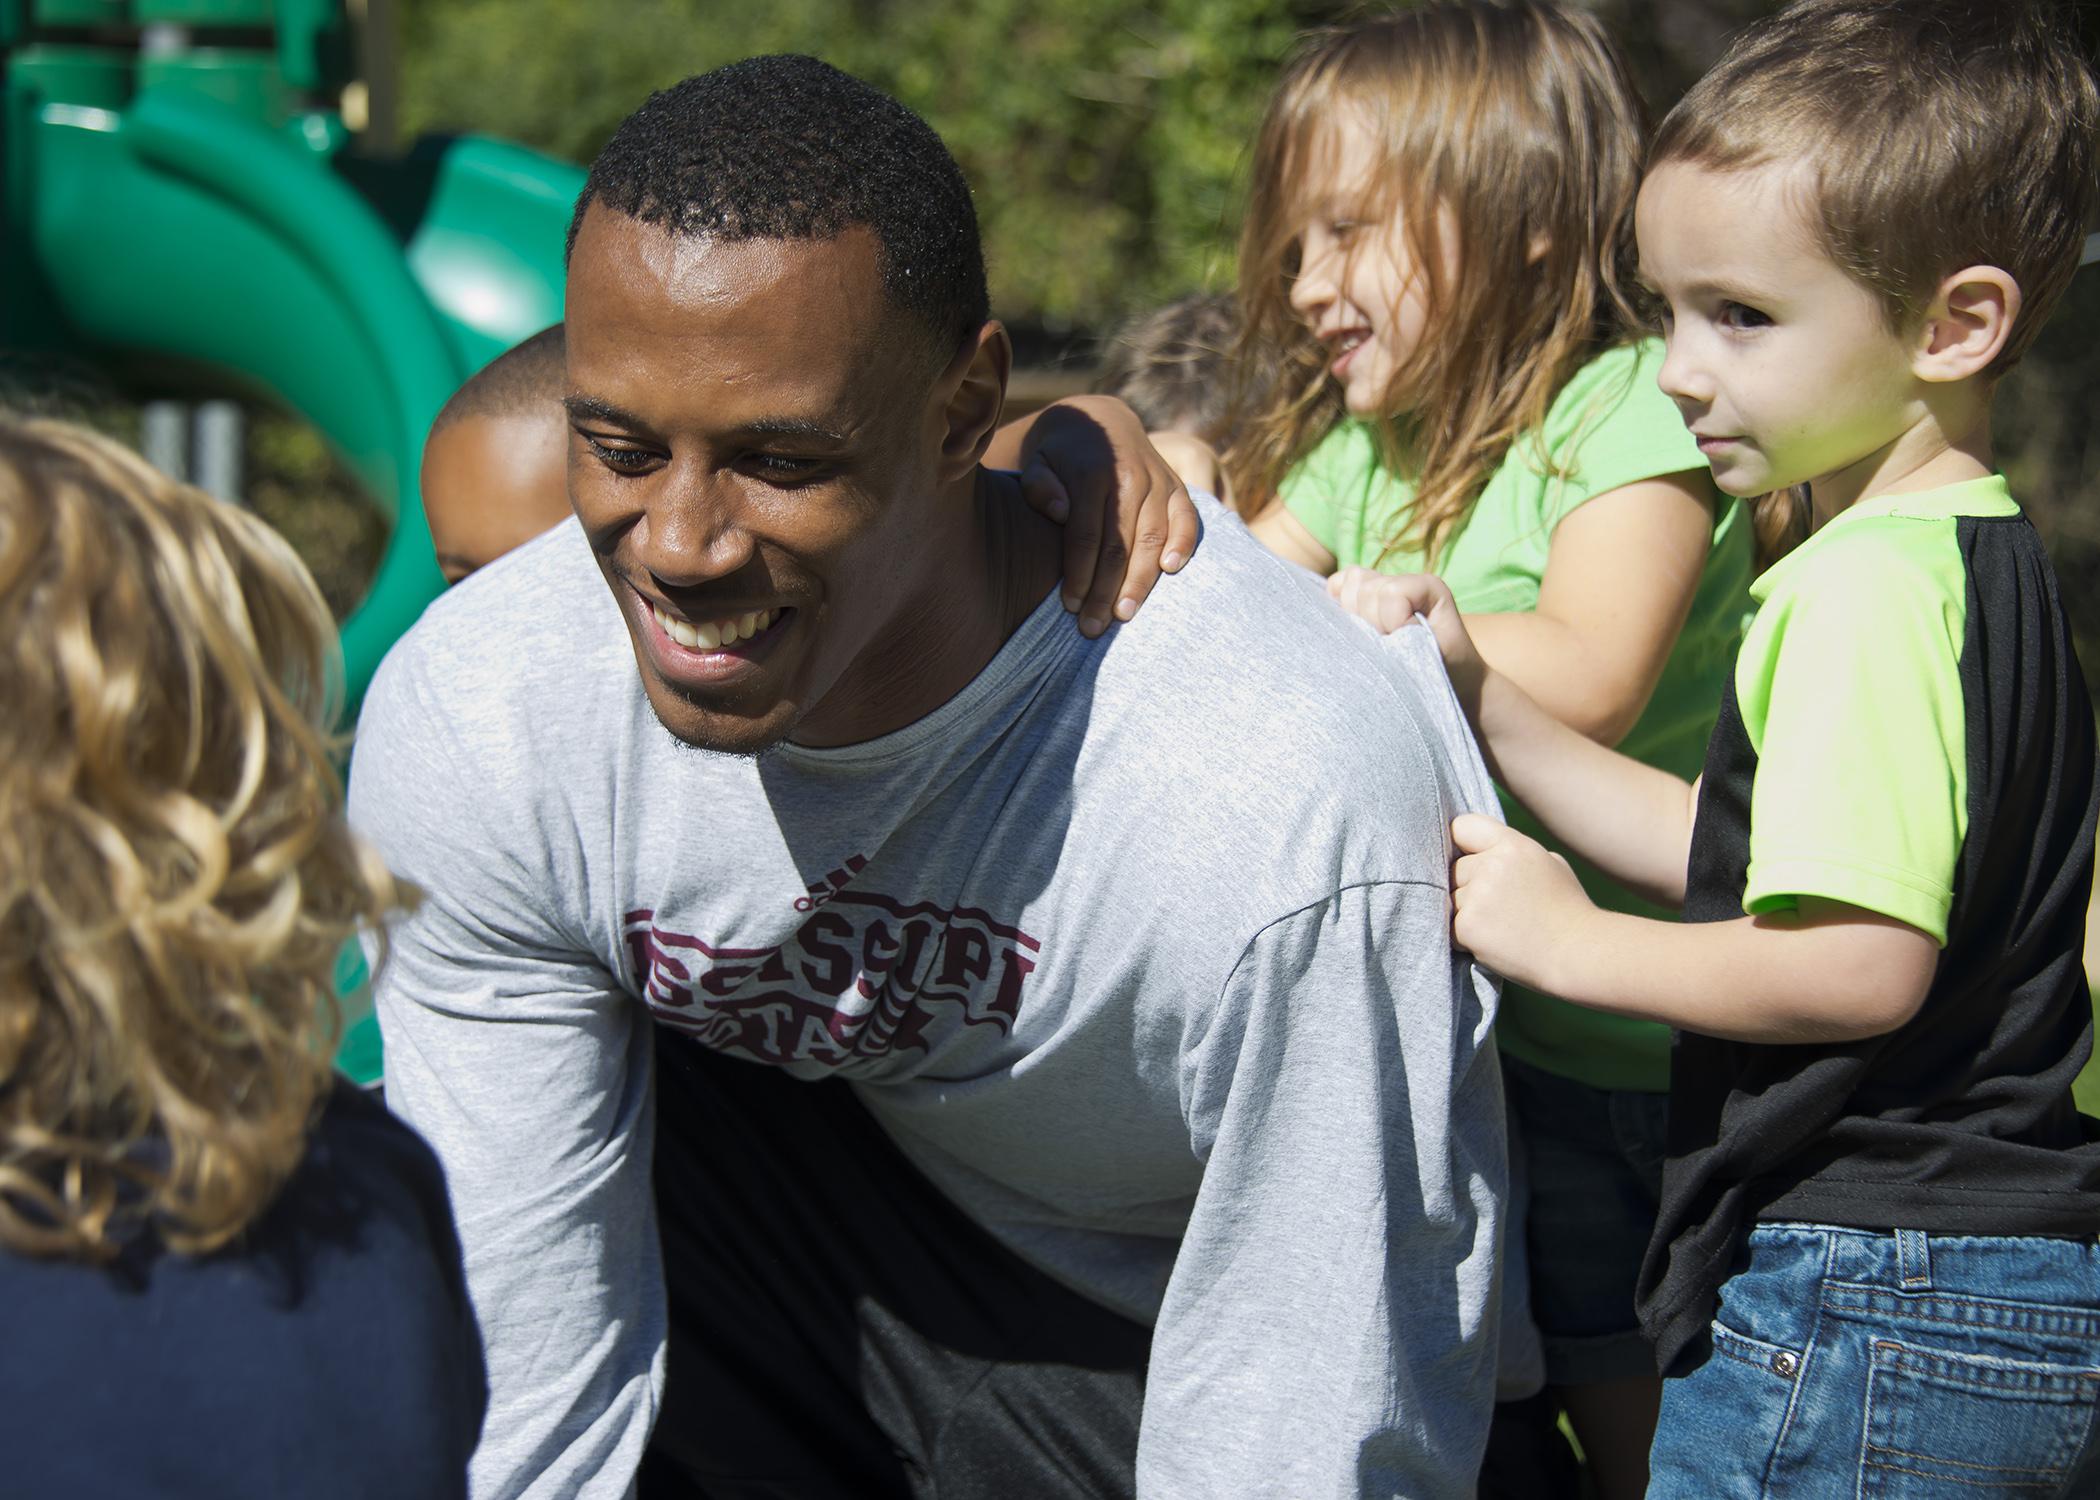 Matt Wells, a senior football player at Mississippi State University, interacts with preschool children during his internship at the MSU Child Development and Family Studies Center. (Photo by MSU College of Agriculture and Life Sciences/David Ammon)